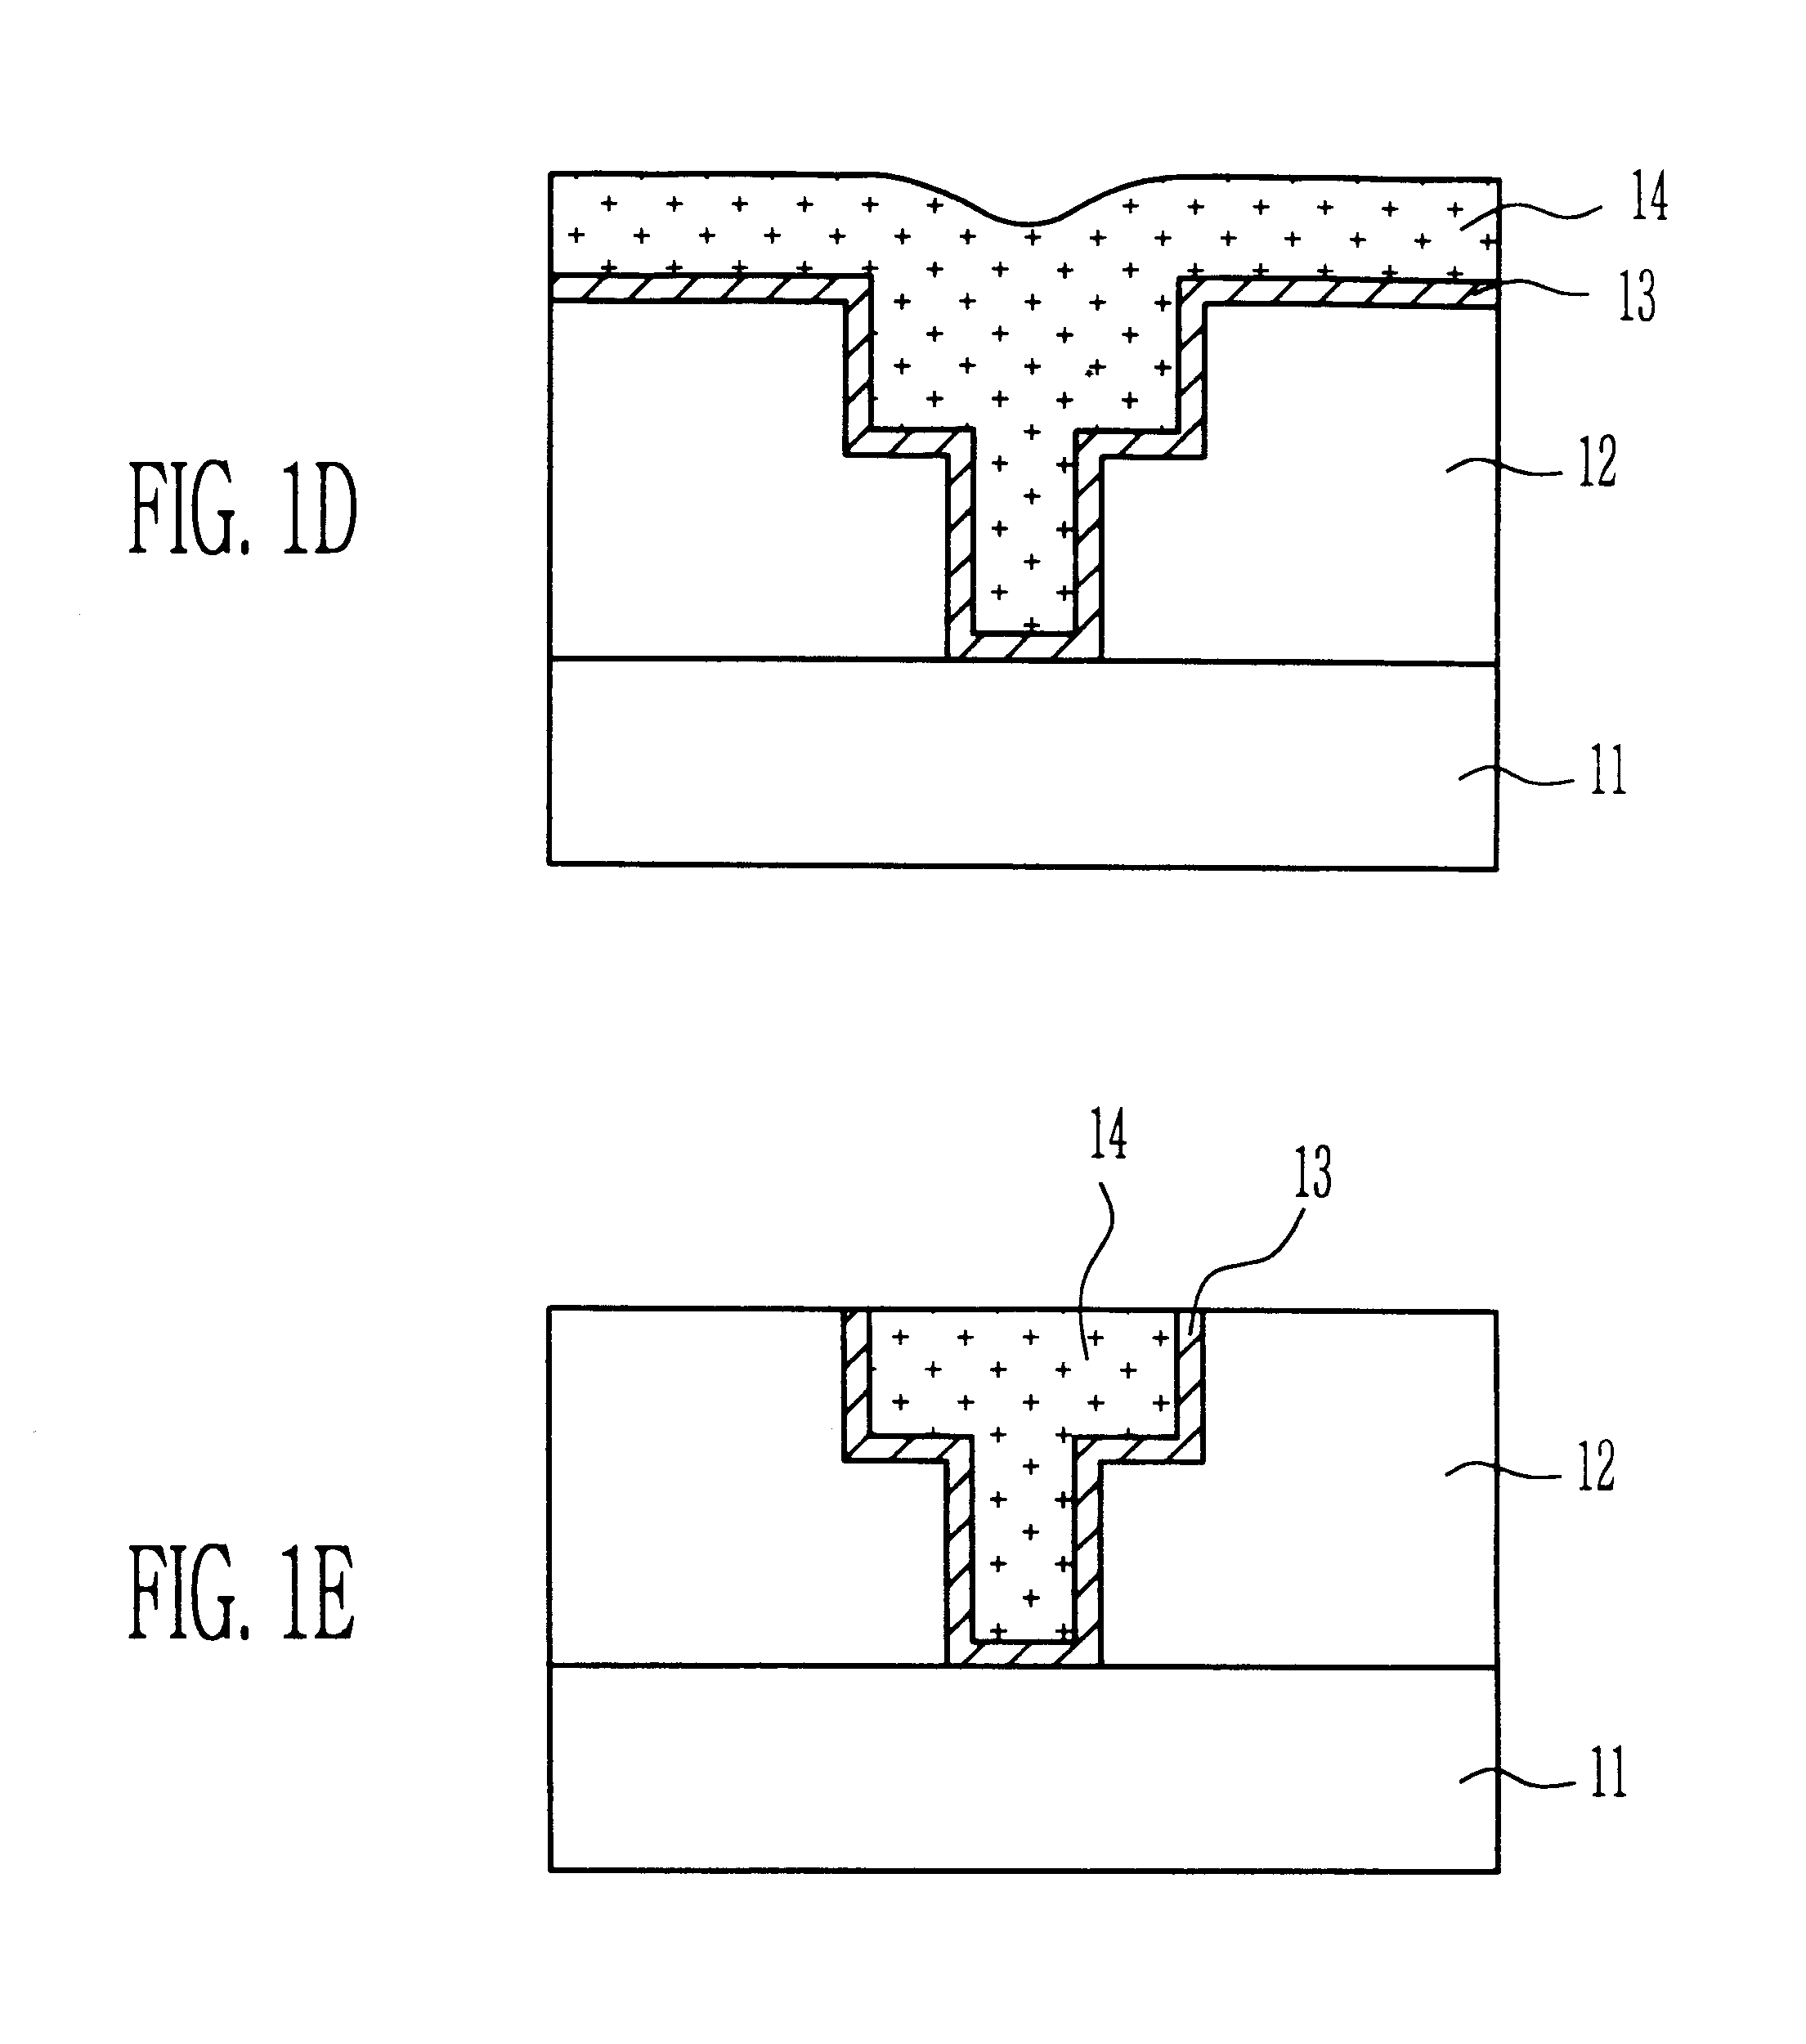 Method of catalyzing copper deposition in a damascene structure by plasma treating the barrier layer and then applying a catalyst such as iodine or iodine compounds to the barrier layer